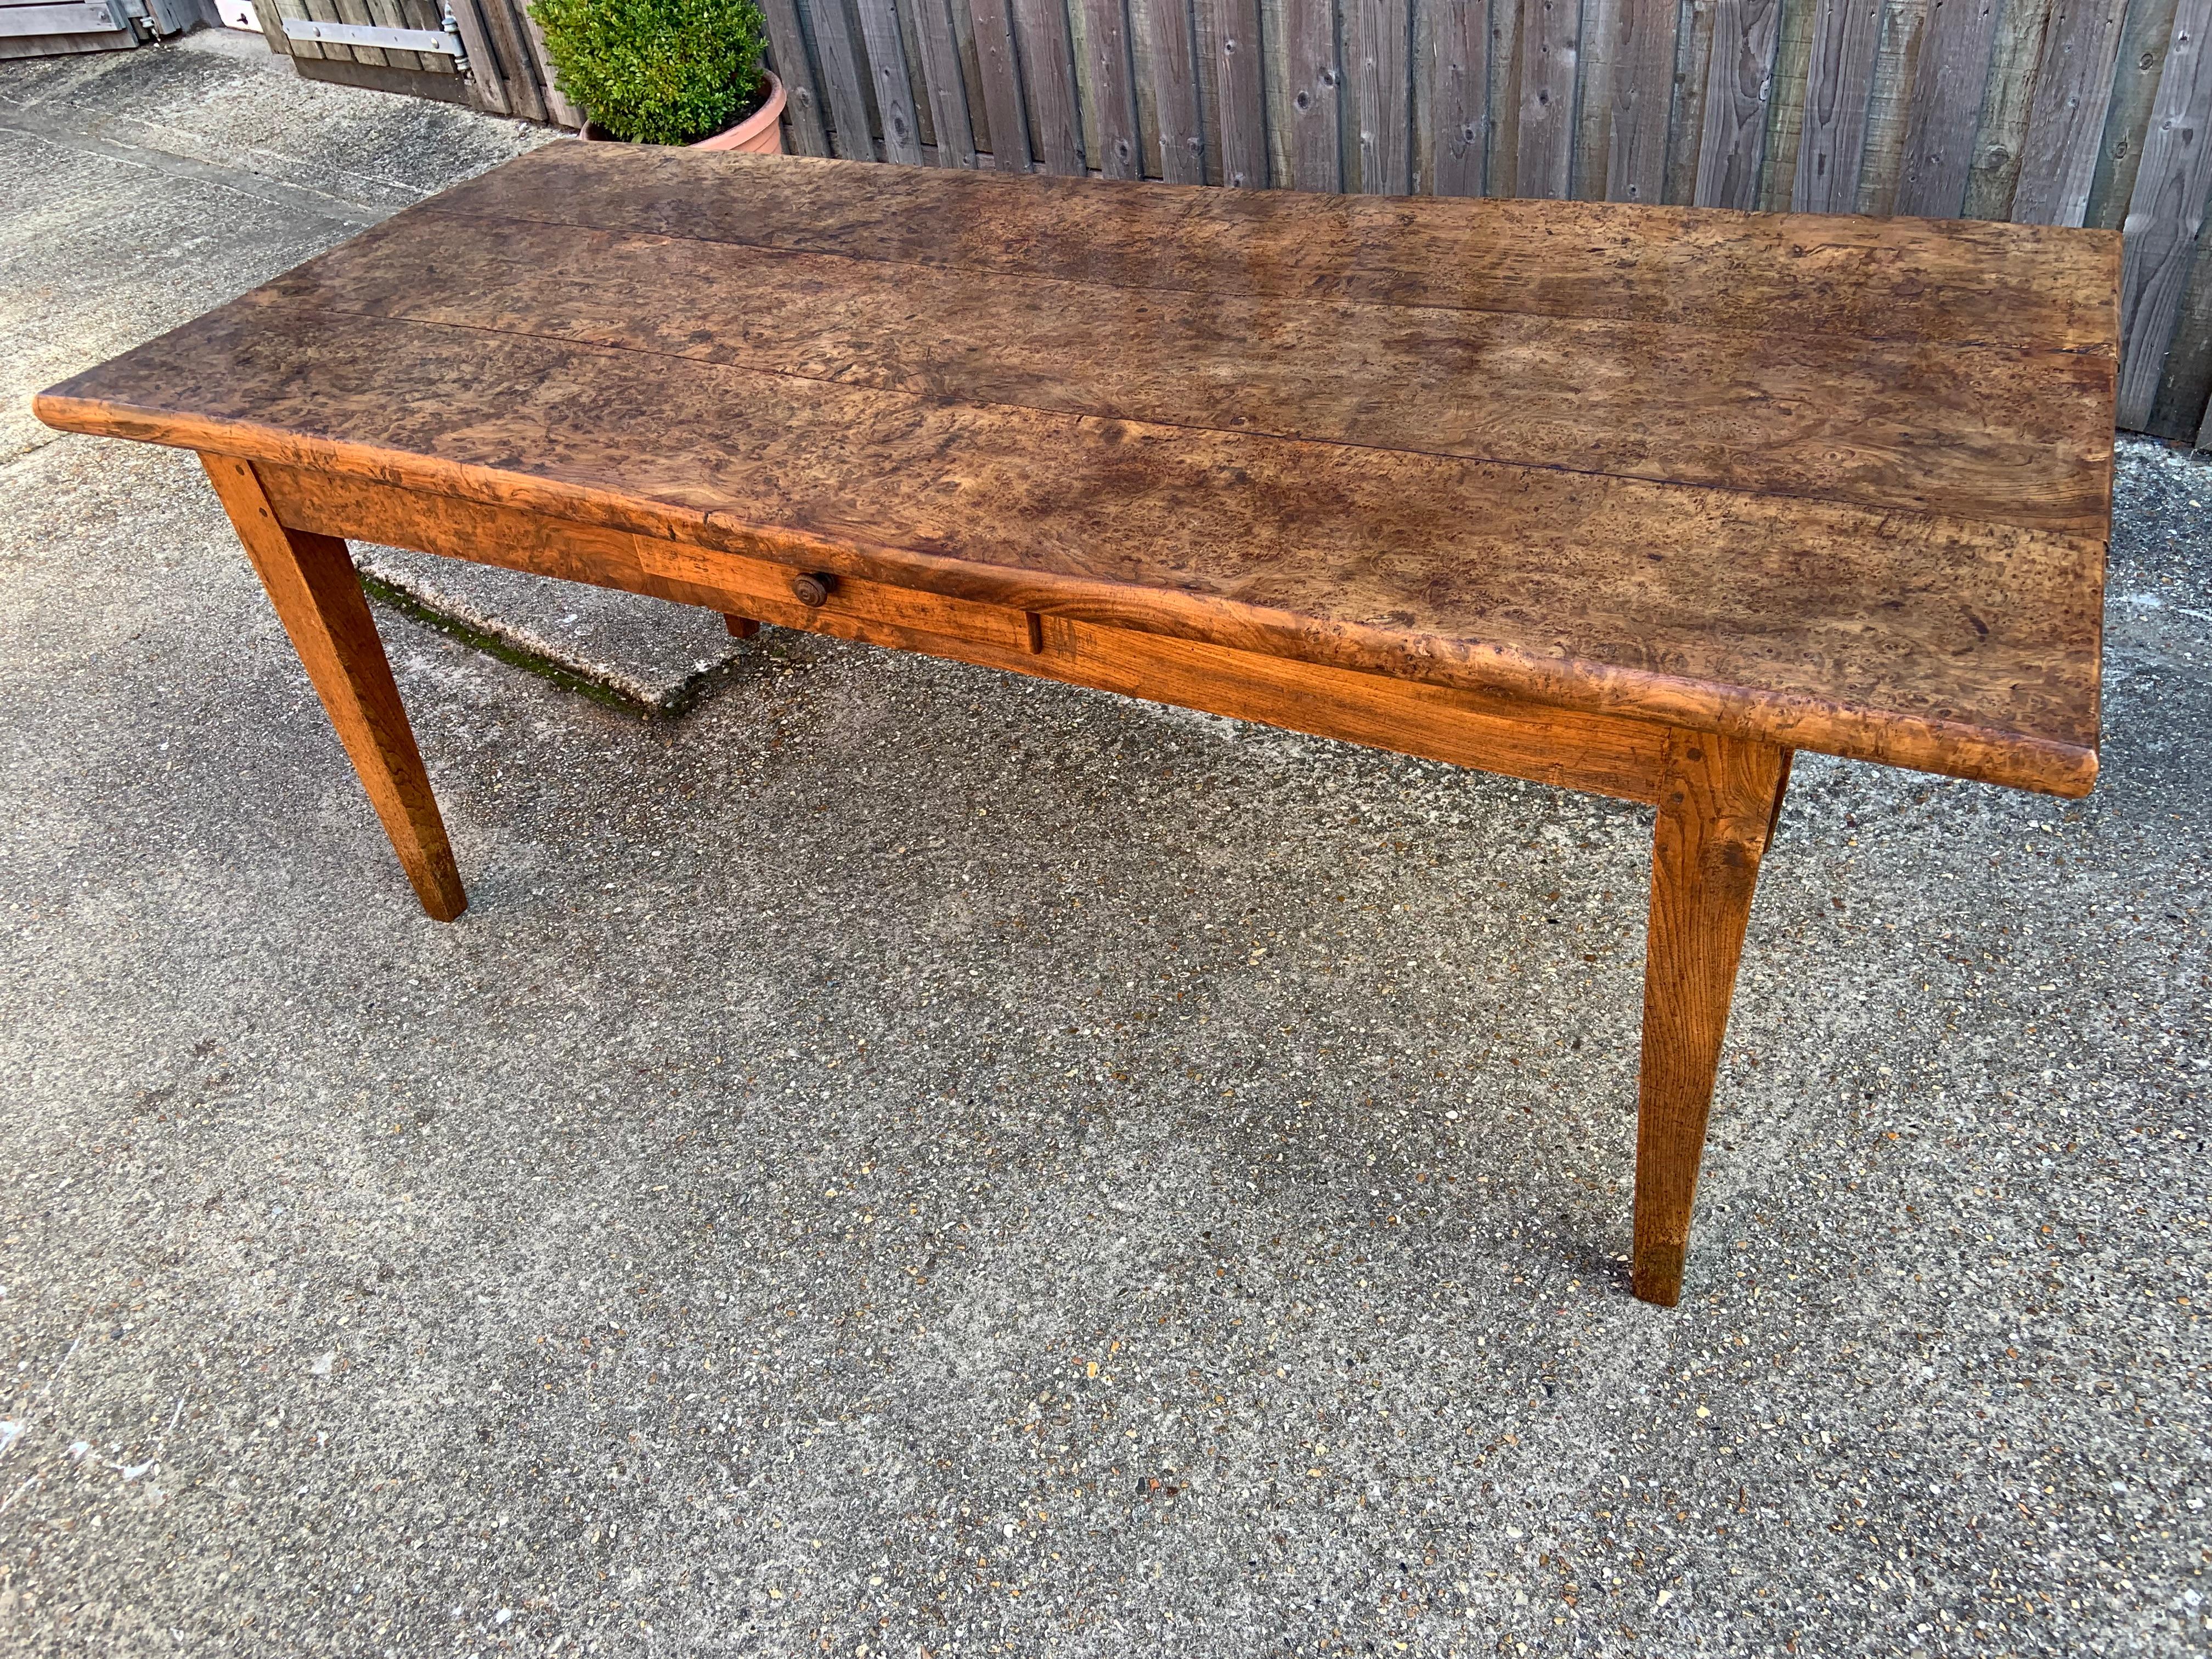 Antique rare wide burr elm thick top farmhouse table. The table has a beautiful burr elm three plank top with burr elm thick rails and elm legs. The top is 1.5 